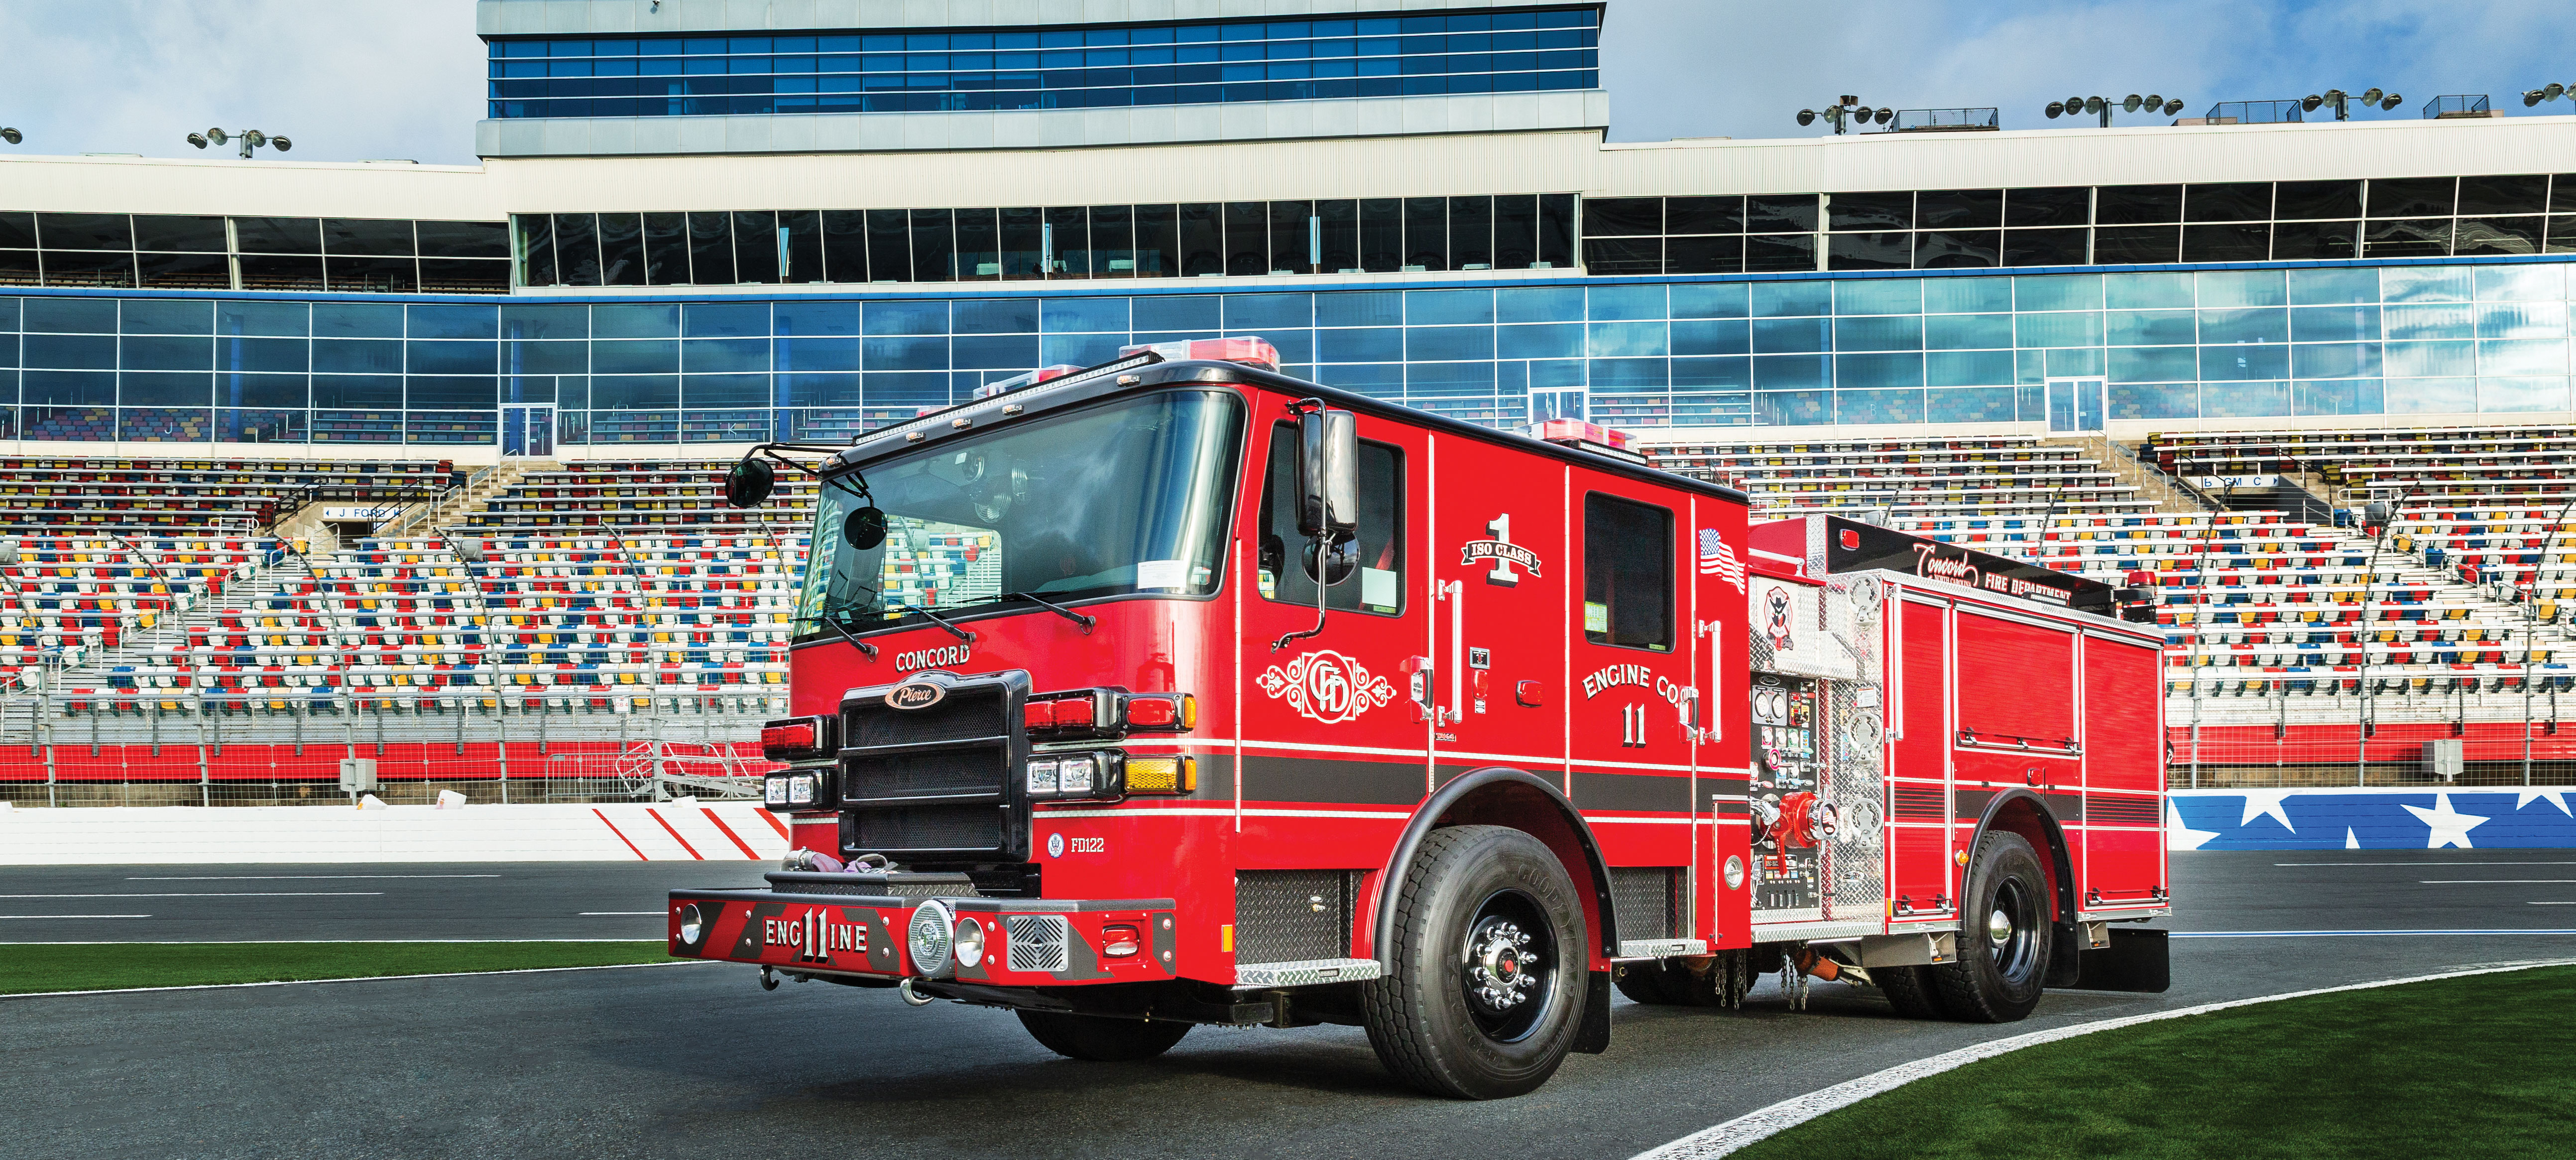 Detail Fire Engines Pics Nomer 31